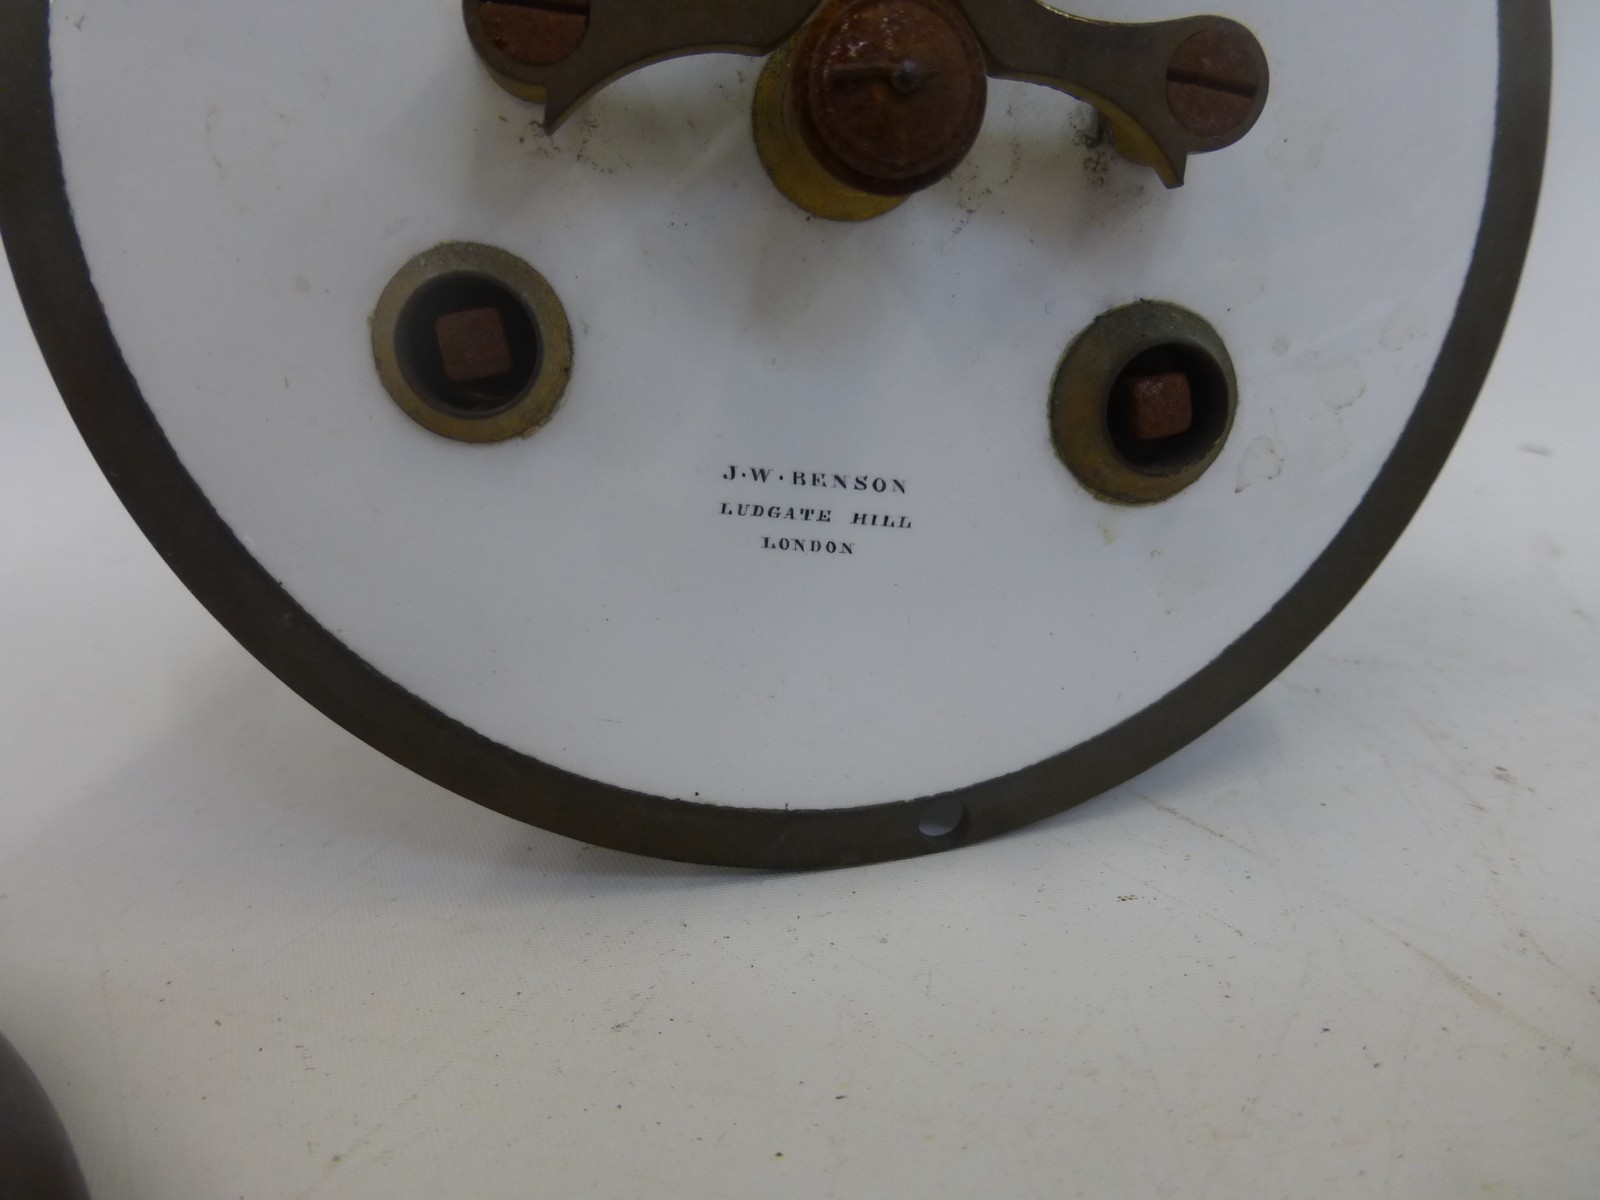 A 19th Century French clock movement with dead beat escapement, inscribed J.W. Benson, Ludgate Hill, - Image 2 of 2